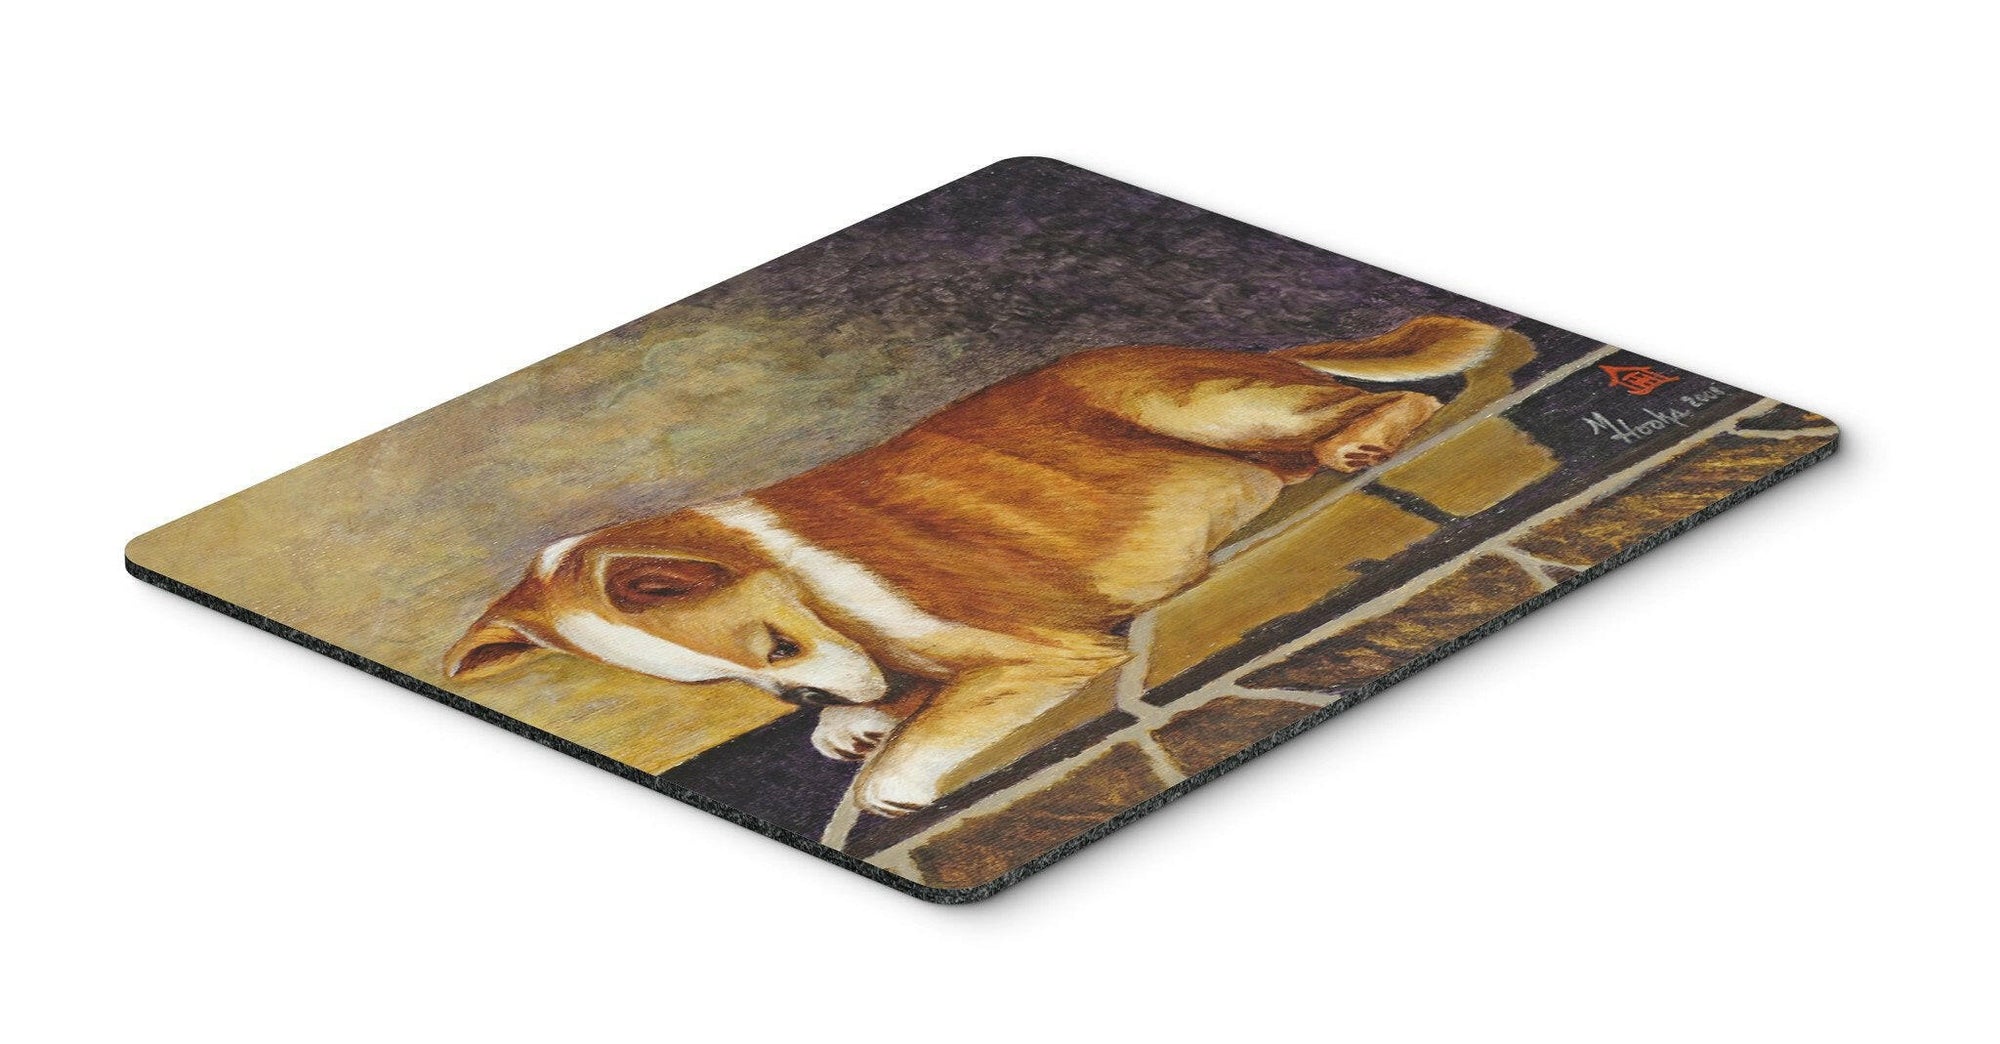 Chihuahua I See Me Mouse Pad, Hot Pad or Trivet MH1052MP by Caroline's Treasures